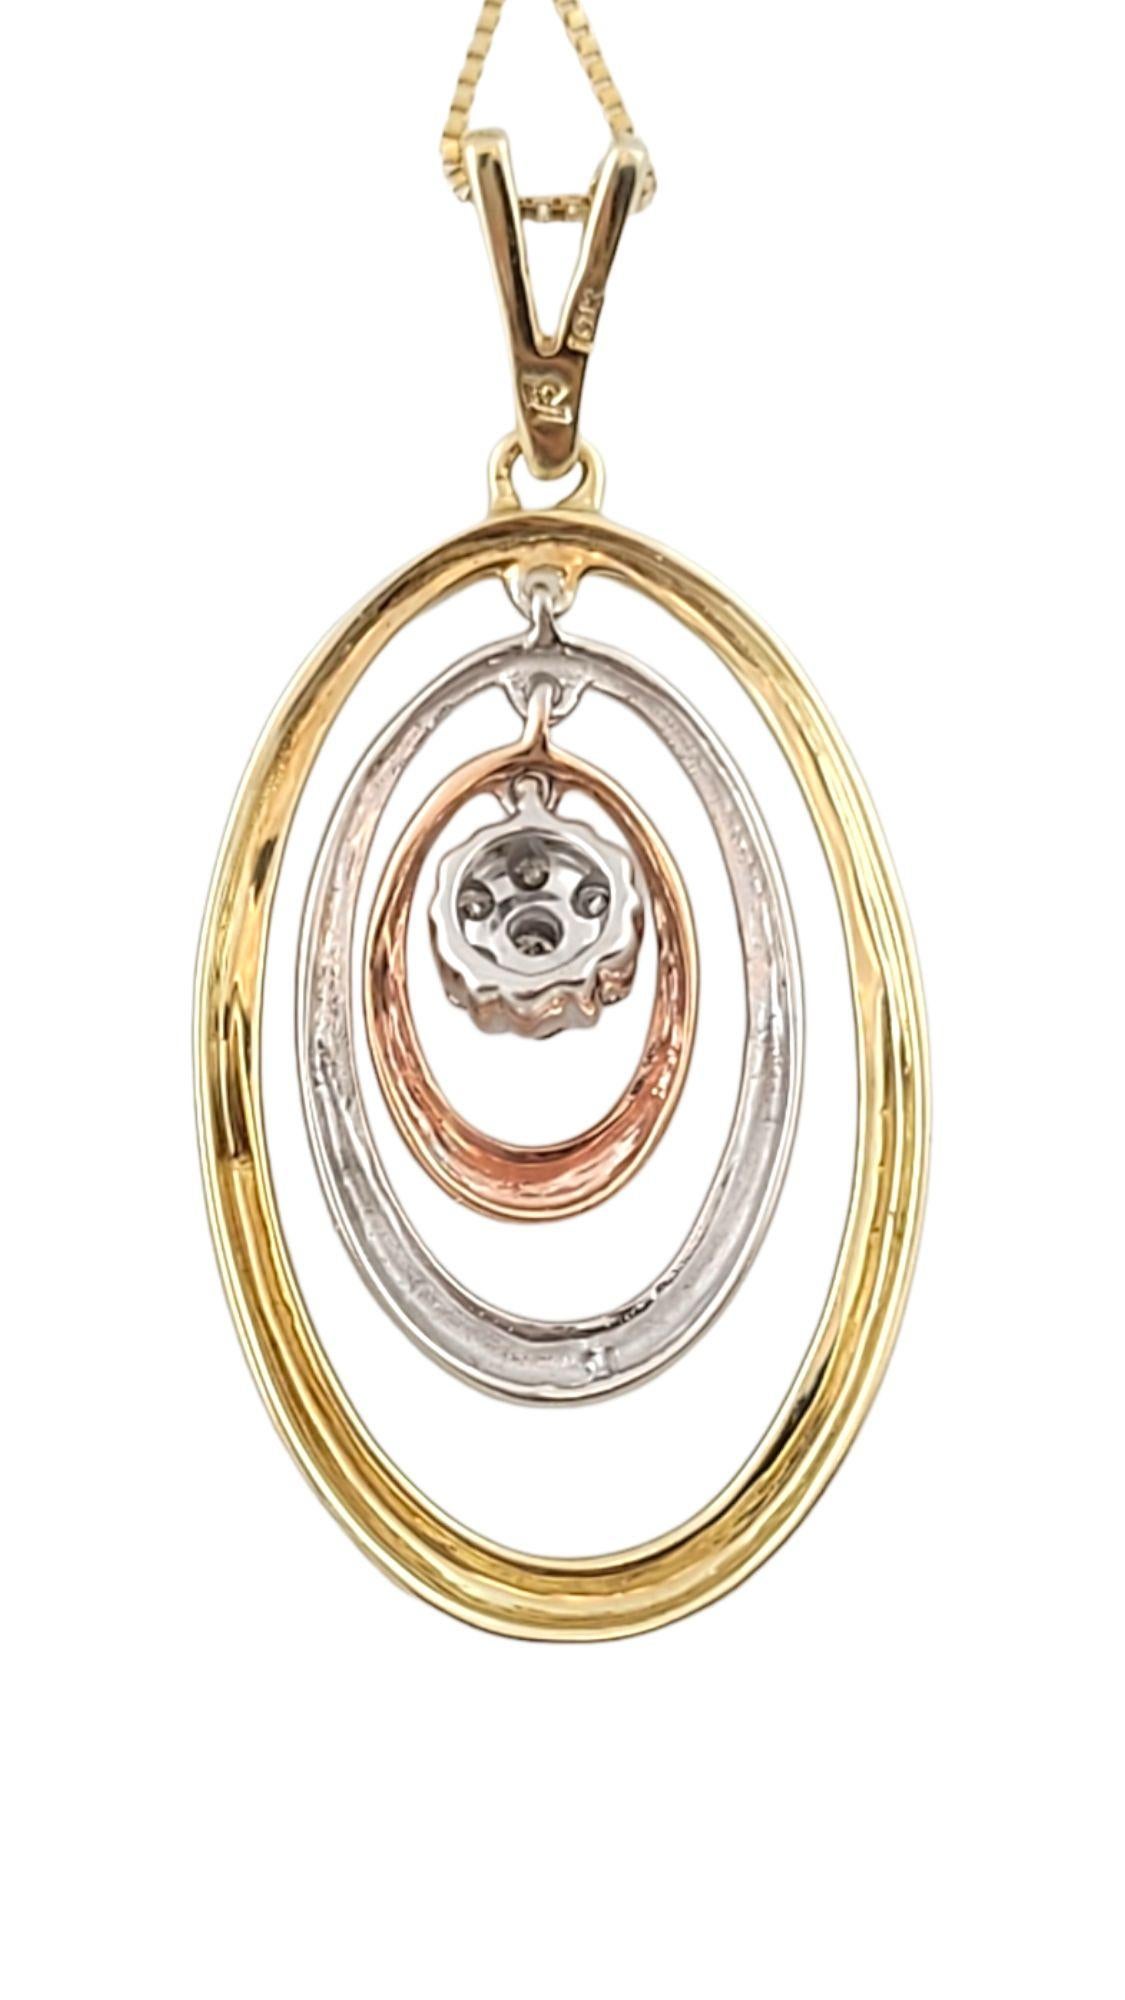 10K Yellow, White and Rose Gold Oval Diamond Pendant Chain #14560 In Good Condition For Sale In Washington Depot, CT